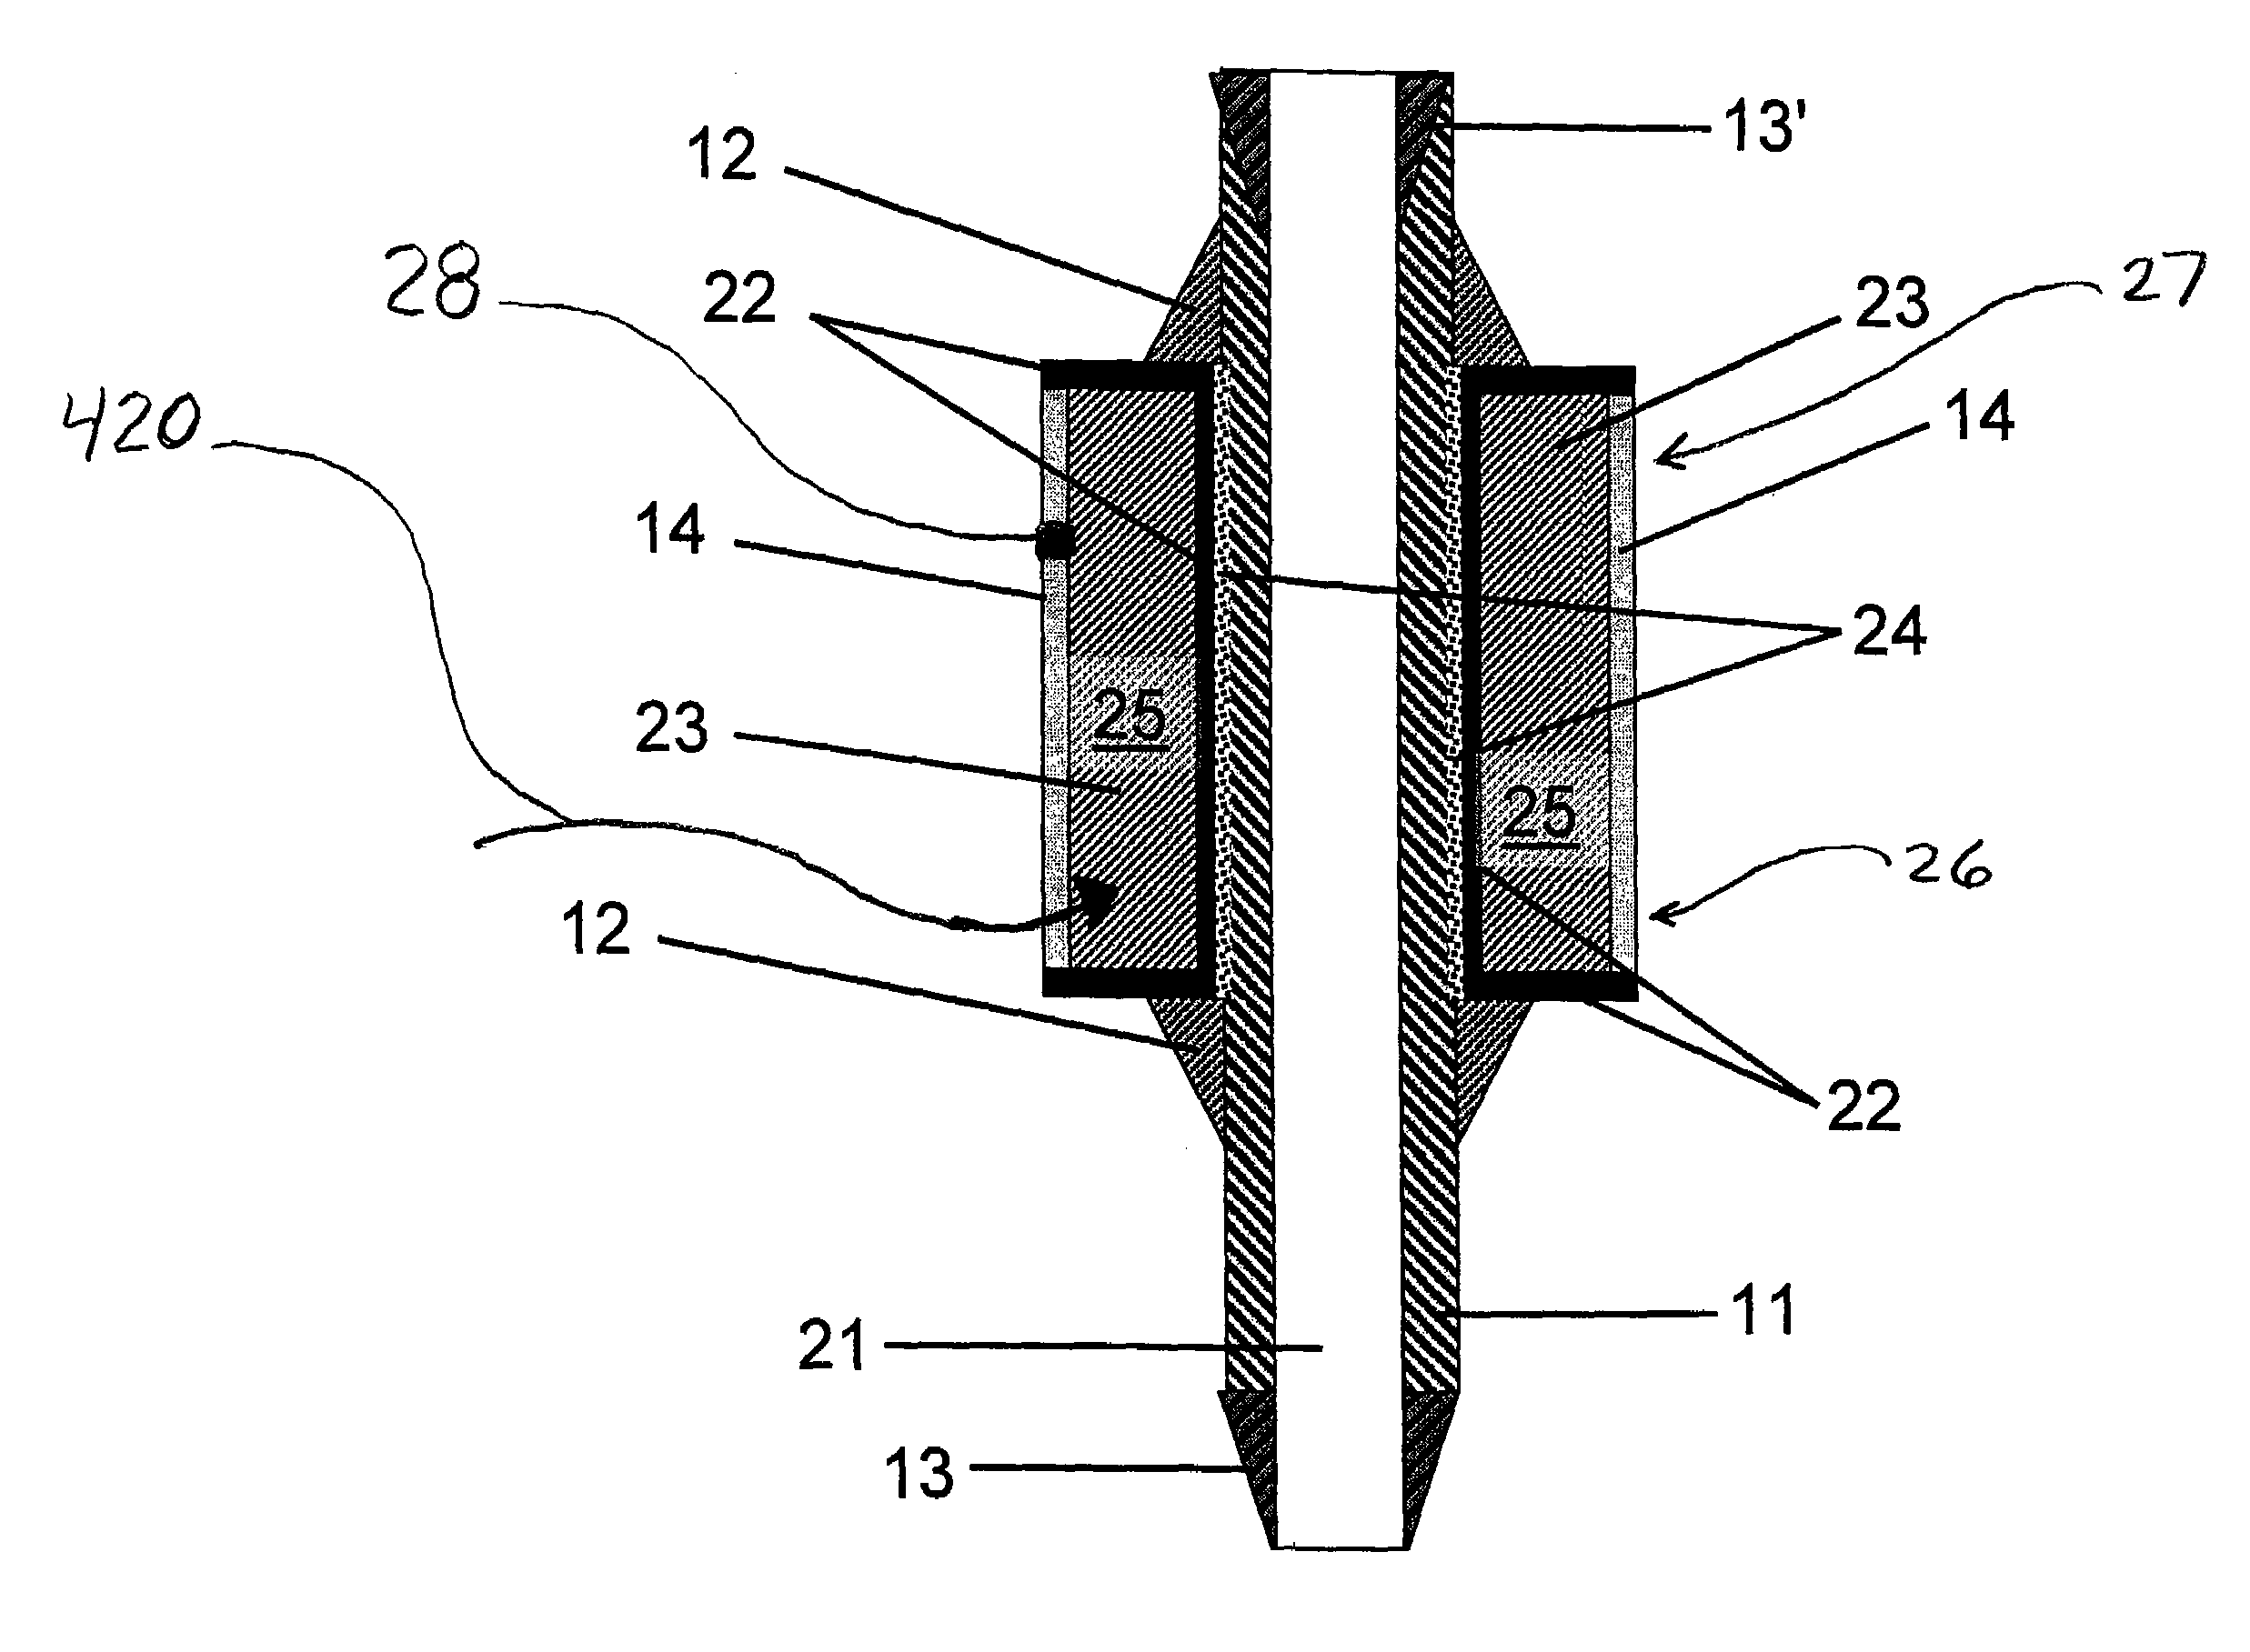 Expandable downhole tools and methods of using and manufacturing same